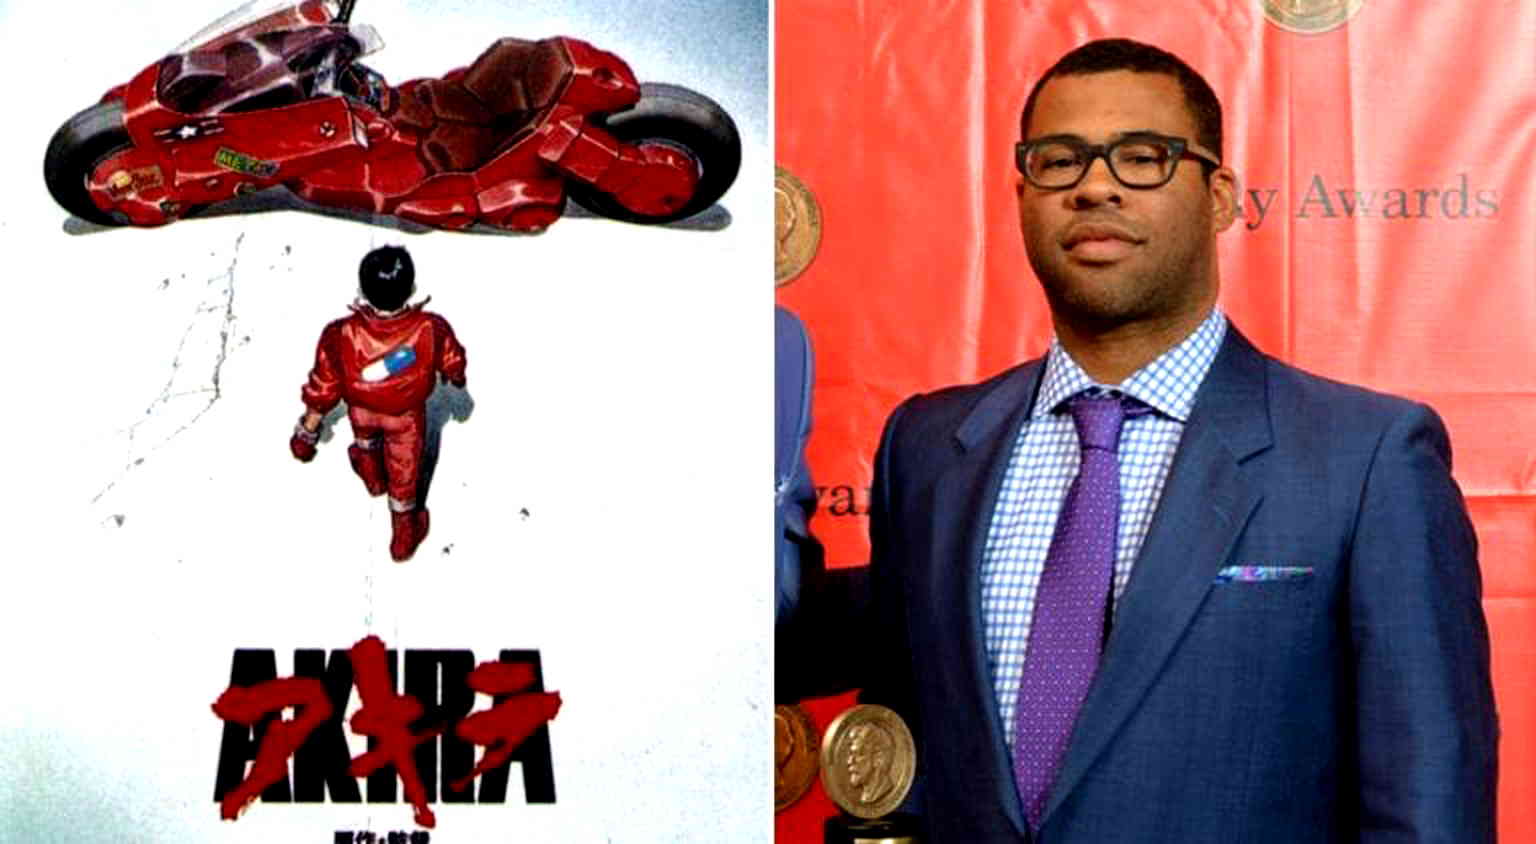 Jordan Peele Might Direct The Live-Adaptation of Akira. Here’s Why I’m HYPED